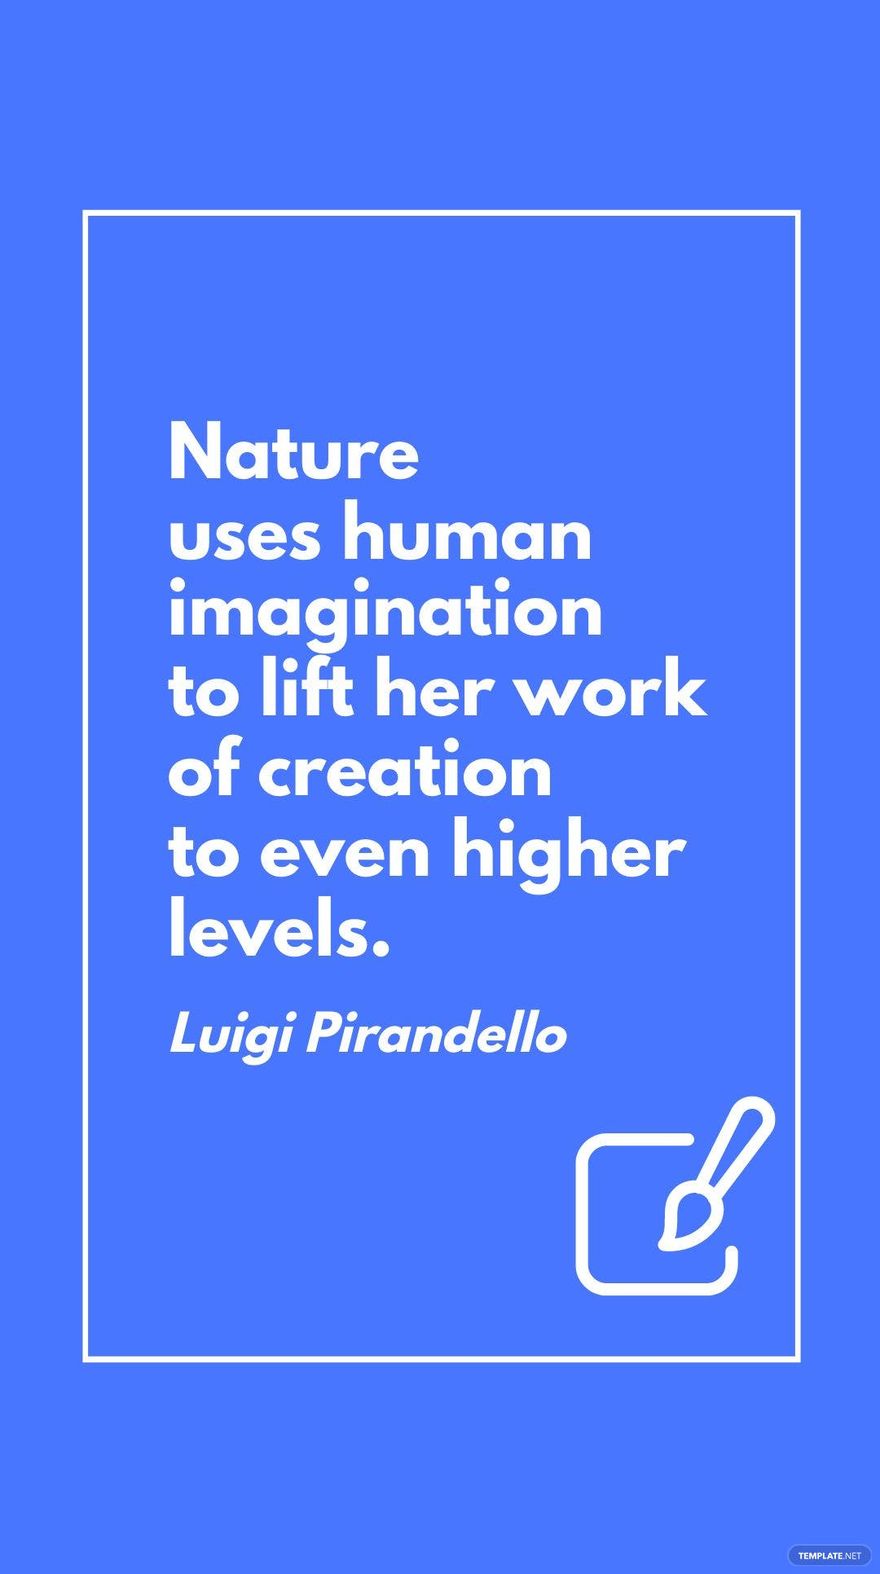 Luigi Pirandello - Nature uses human imagination to lift her work of creation to even higher levels. in JPG